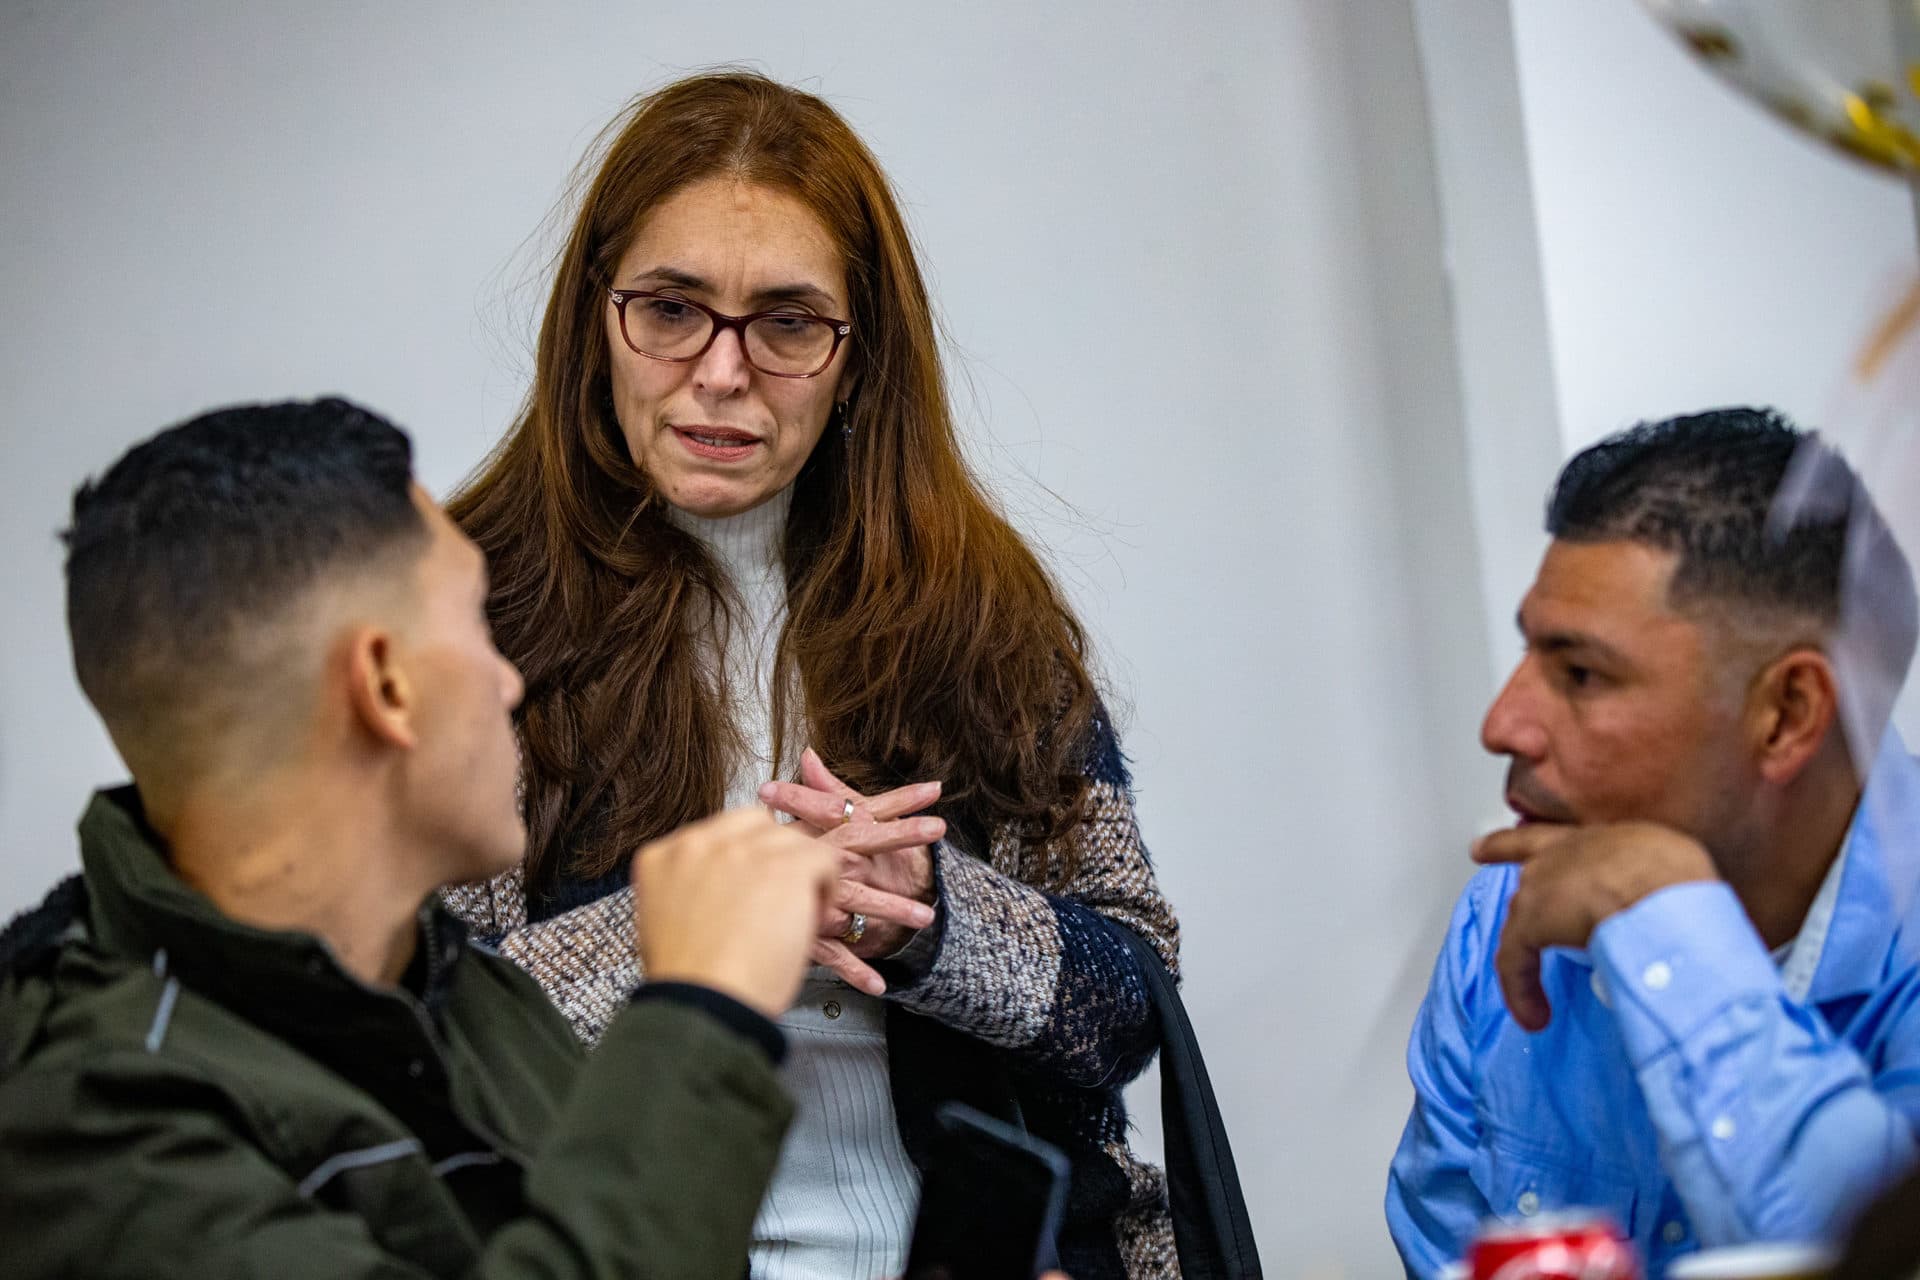 Denise Rincon has been helping Isabel Rodriguez's family since they arrived in Massachusetts this fall. (Jesse Costa/WBUR)